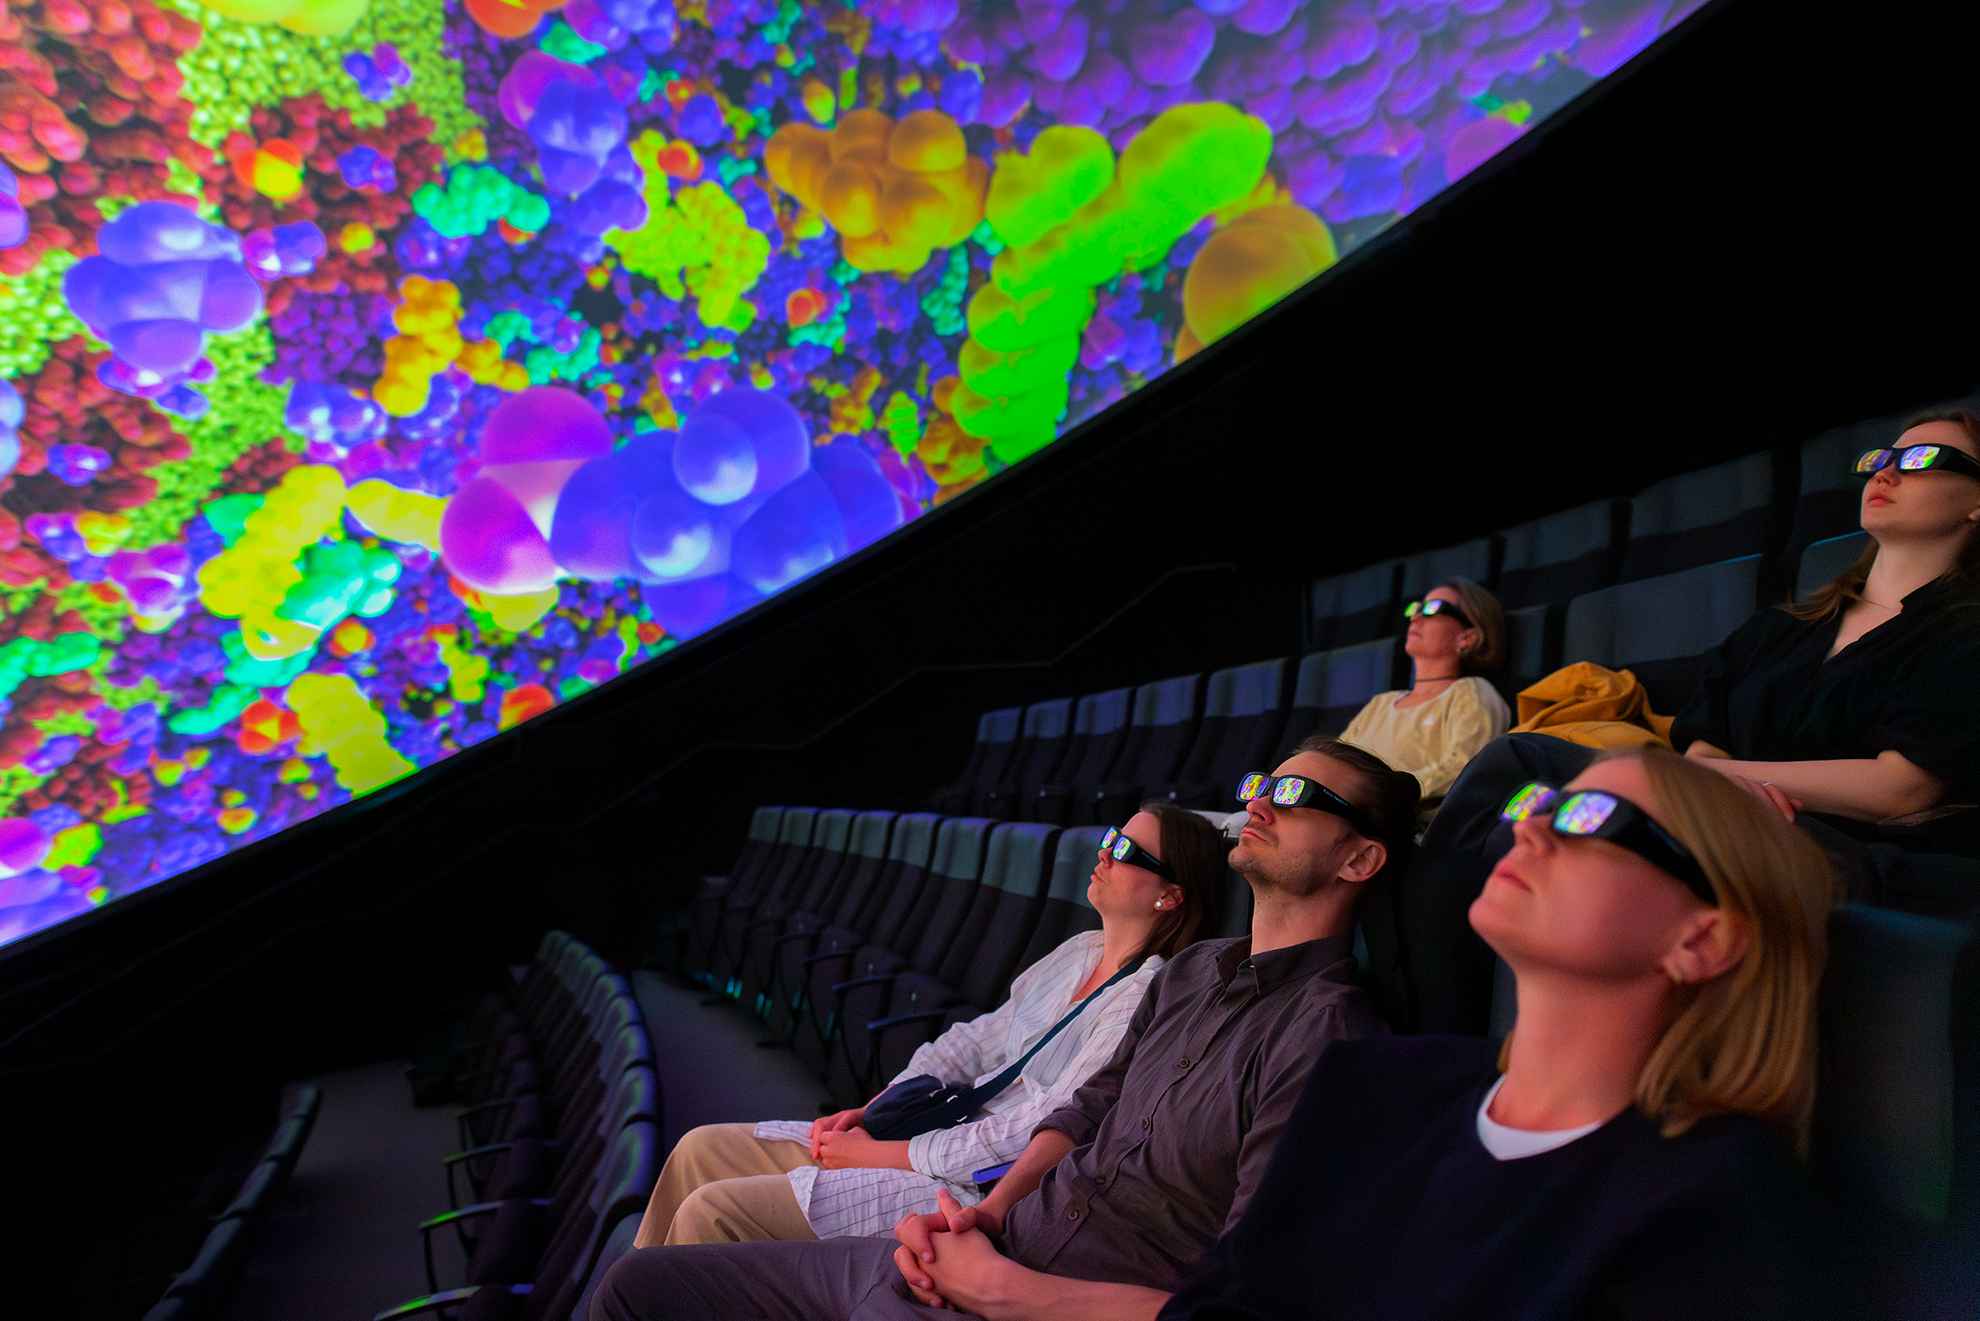 A group of people with 3D glasses sit in chairs and watch the screen in the Wisdome Stockholm.